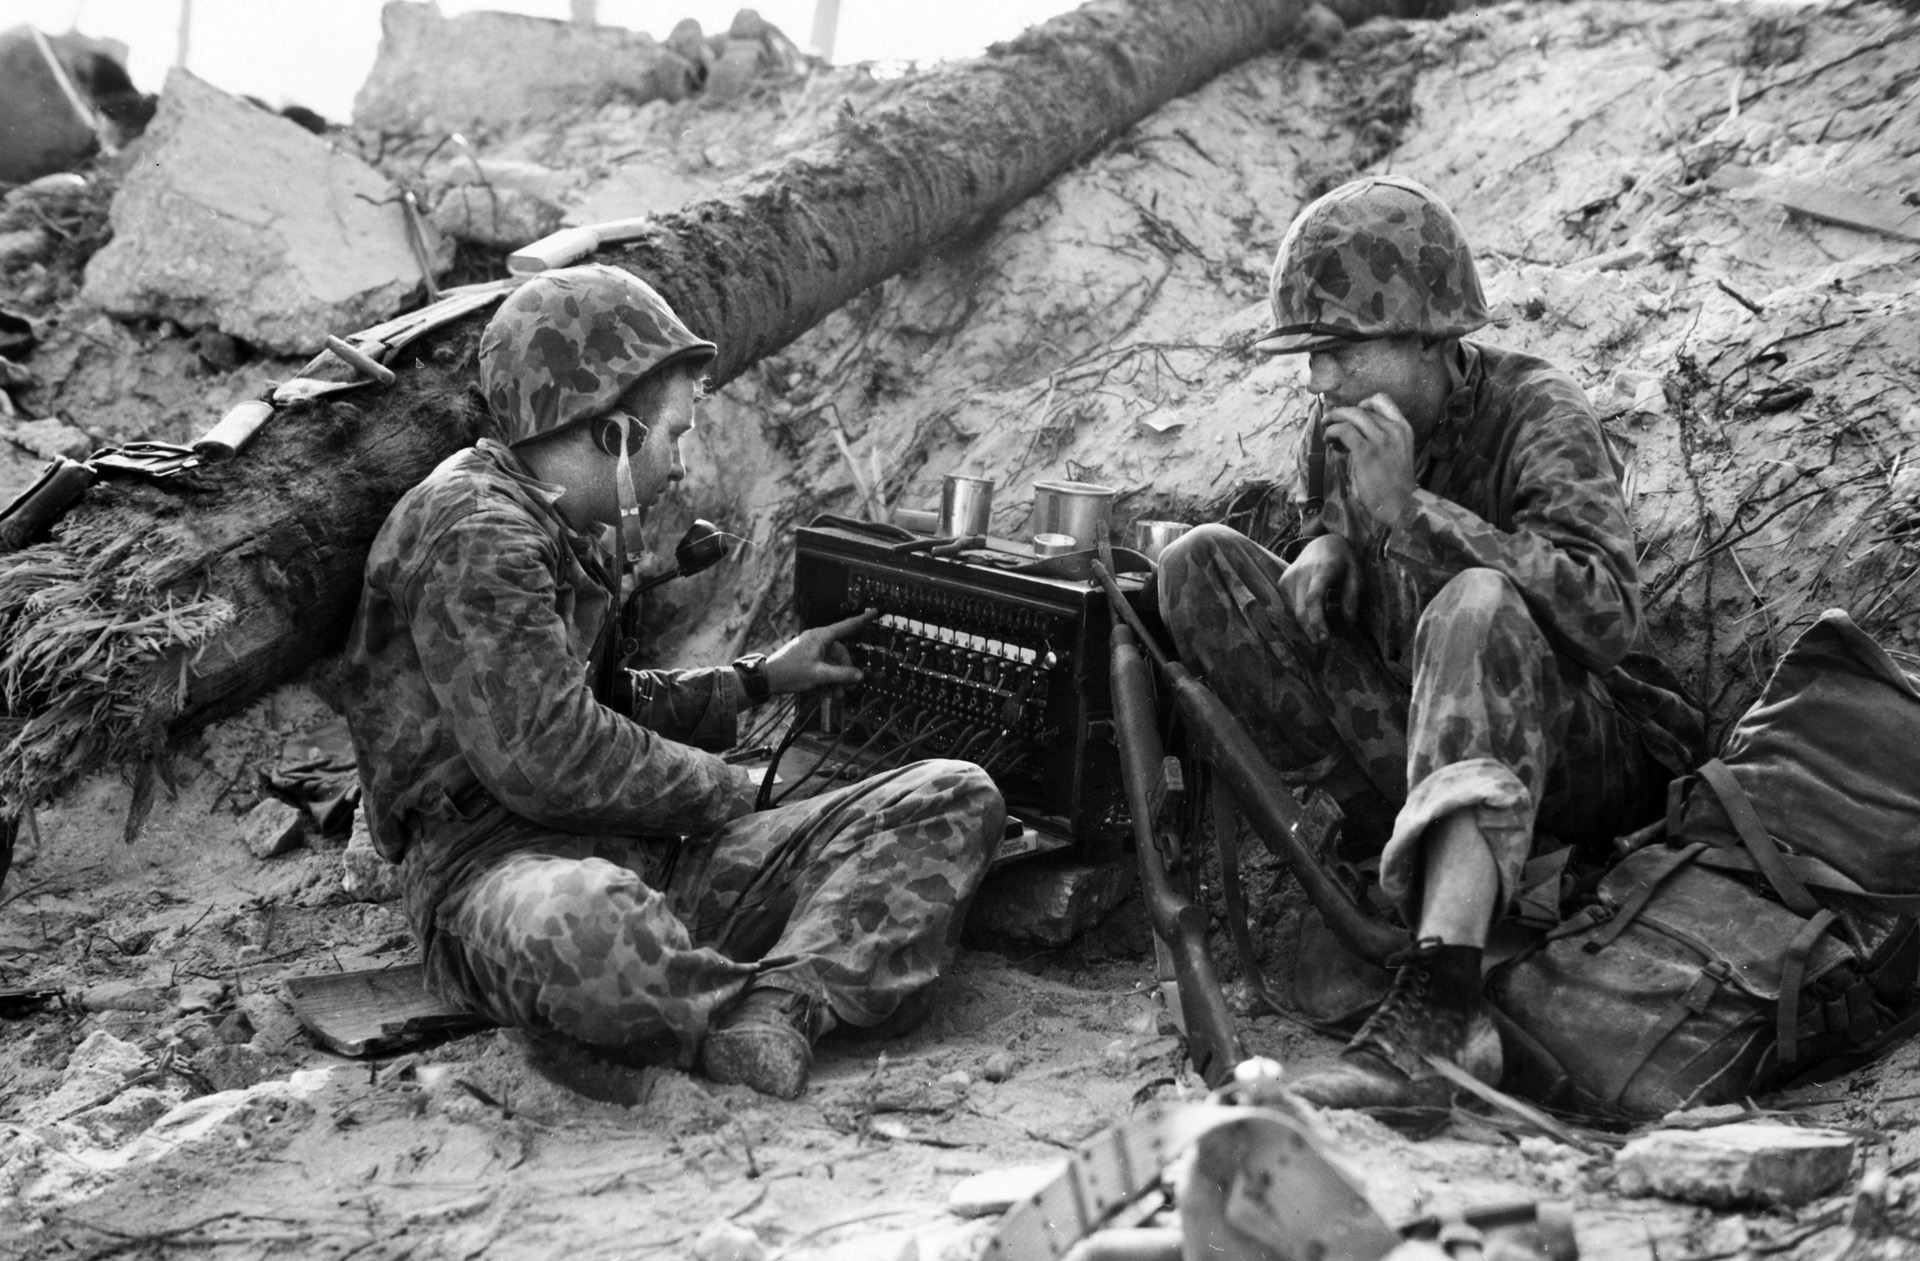 Two Marines of the 2nd Division operate a radio on the embattled islet of Betio during the assault on Tarawa Atoll in November 1942.